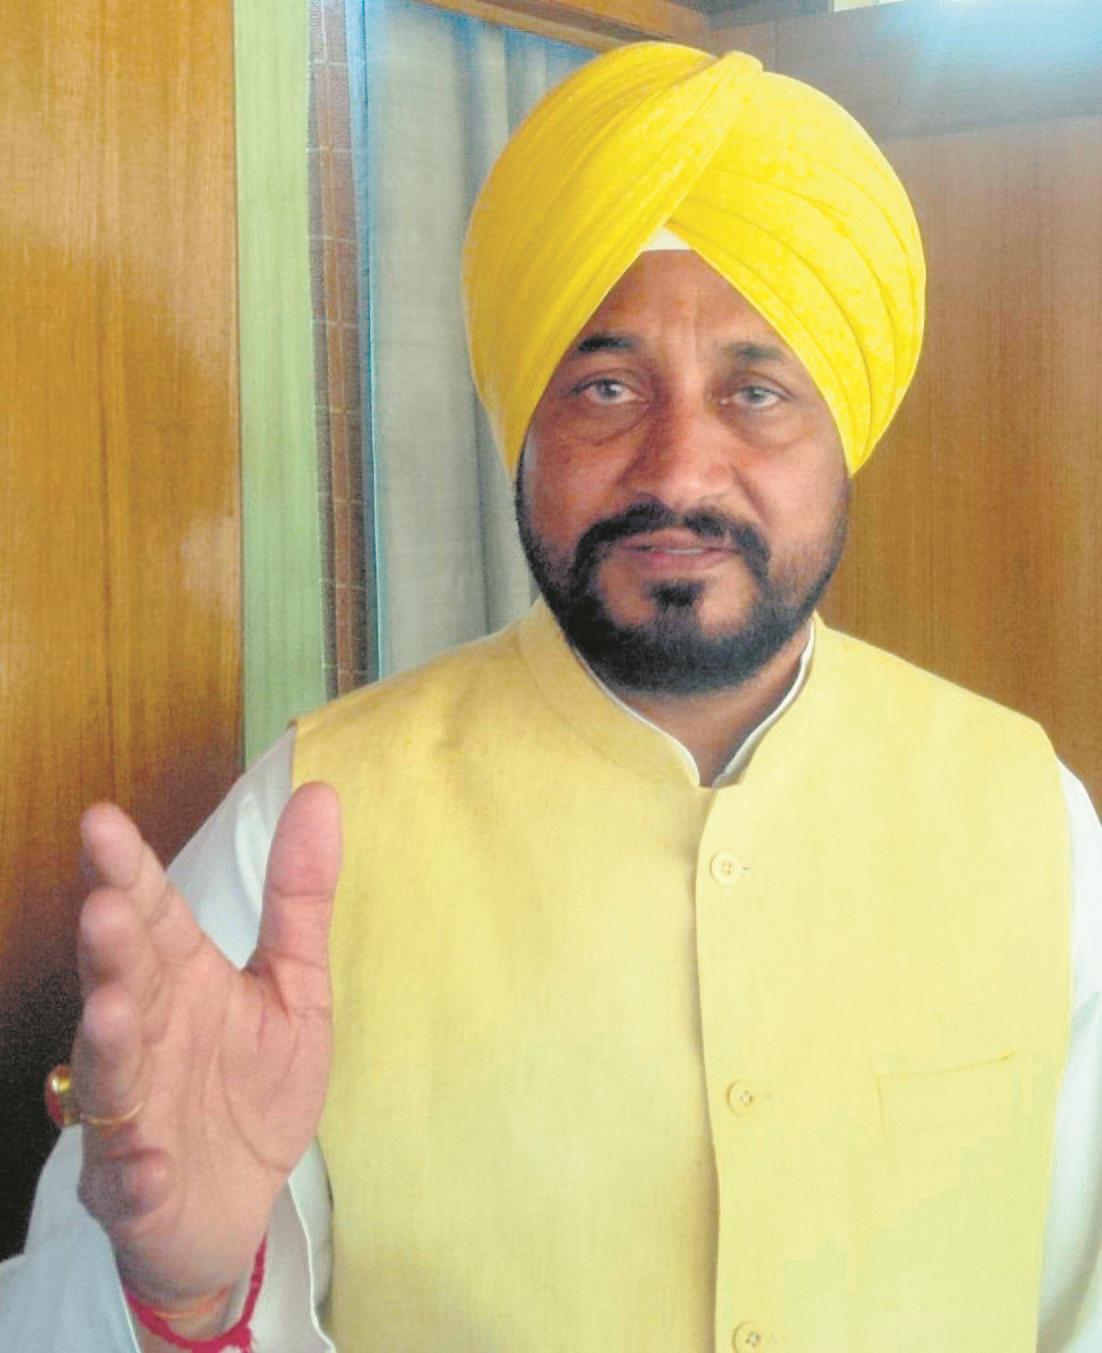 From being Kharar councillor to first Dalit CM, Charanjit Singh Channi has come a long way